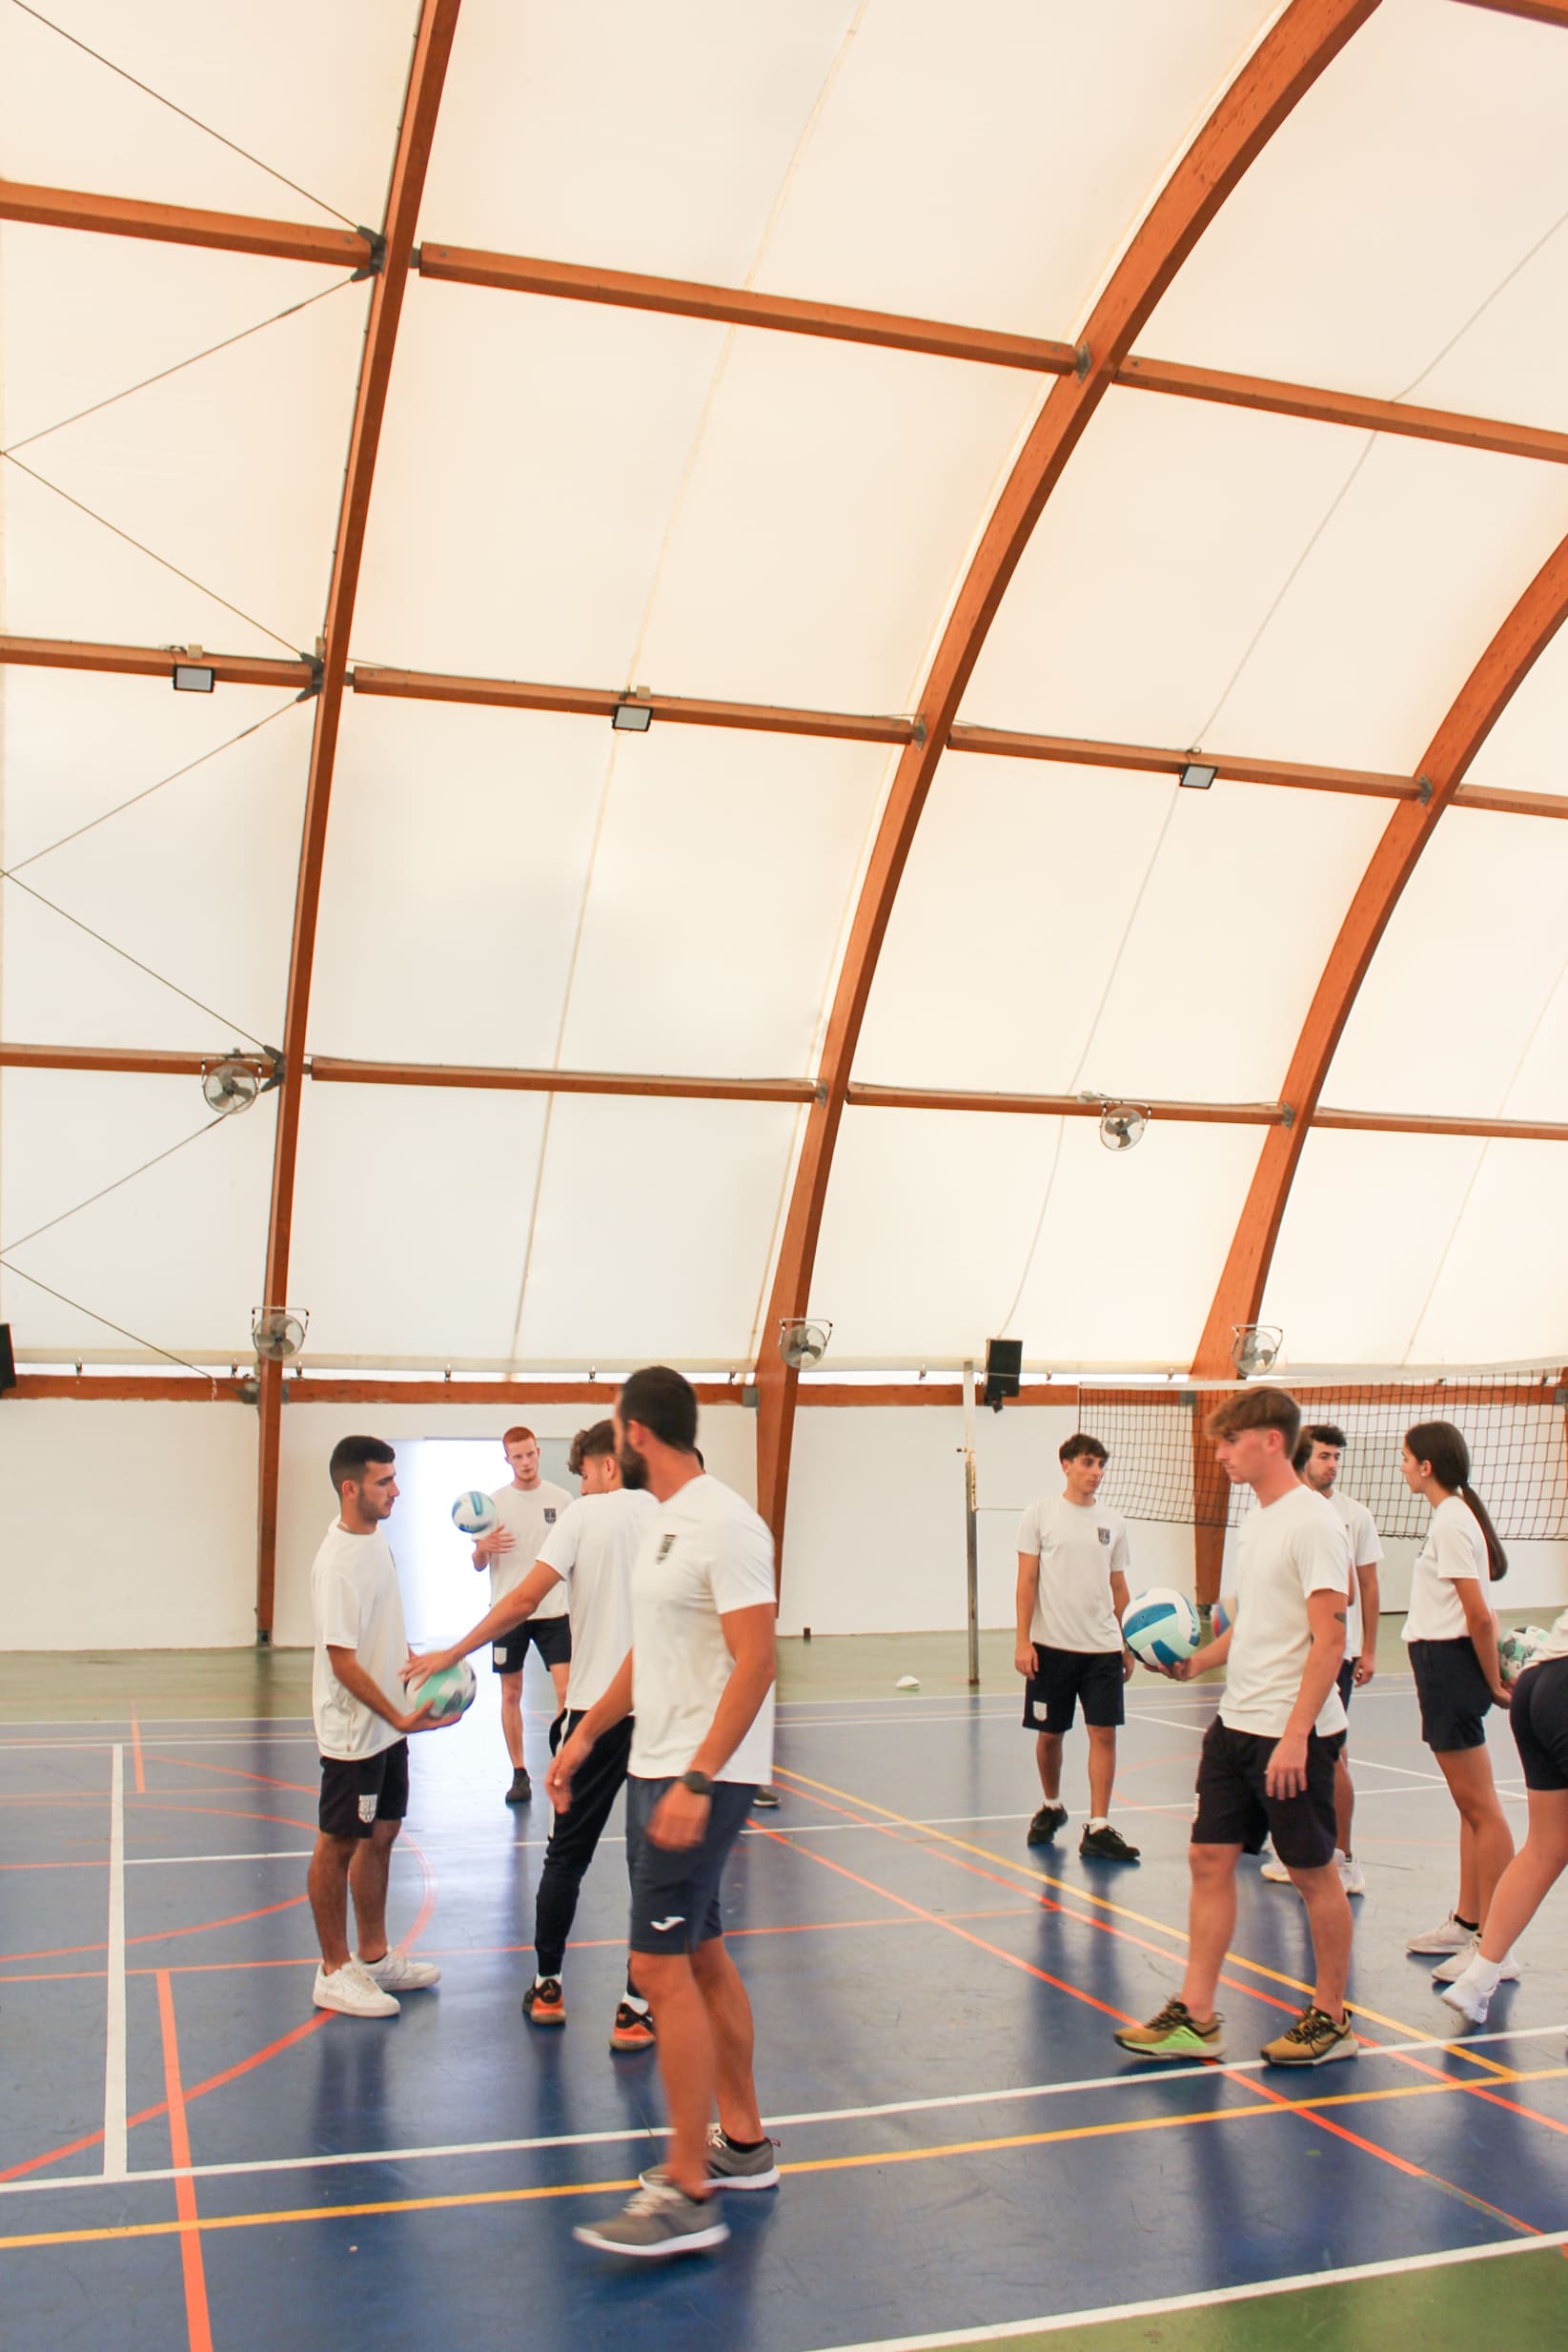 Improvements to the cooling facilities of the Lope de Vega School sports pavilion